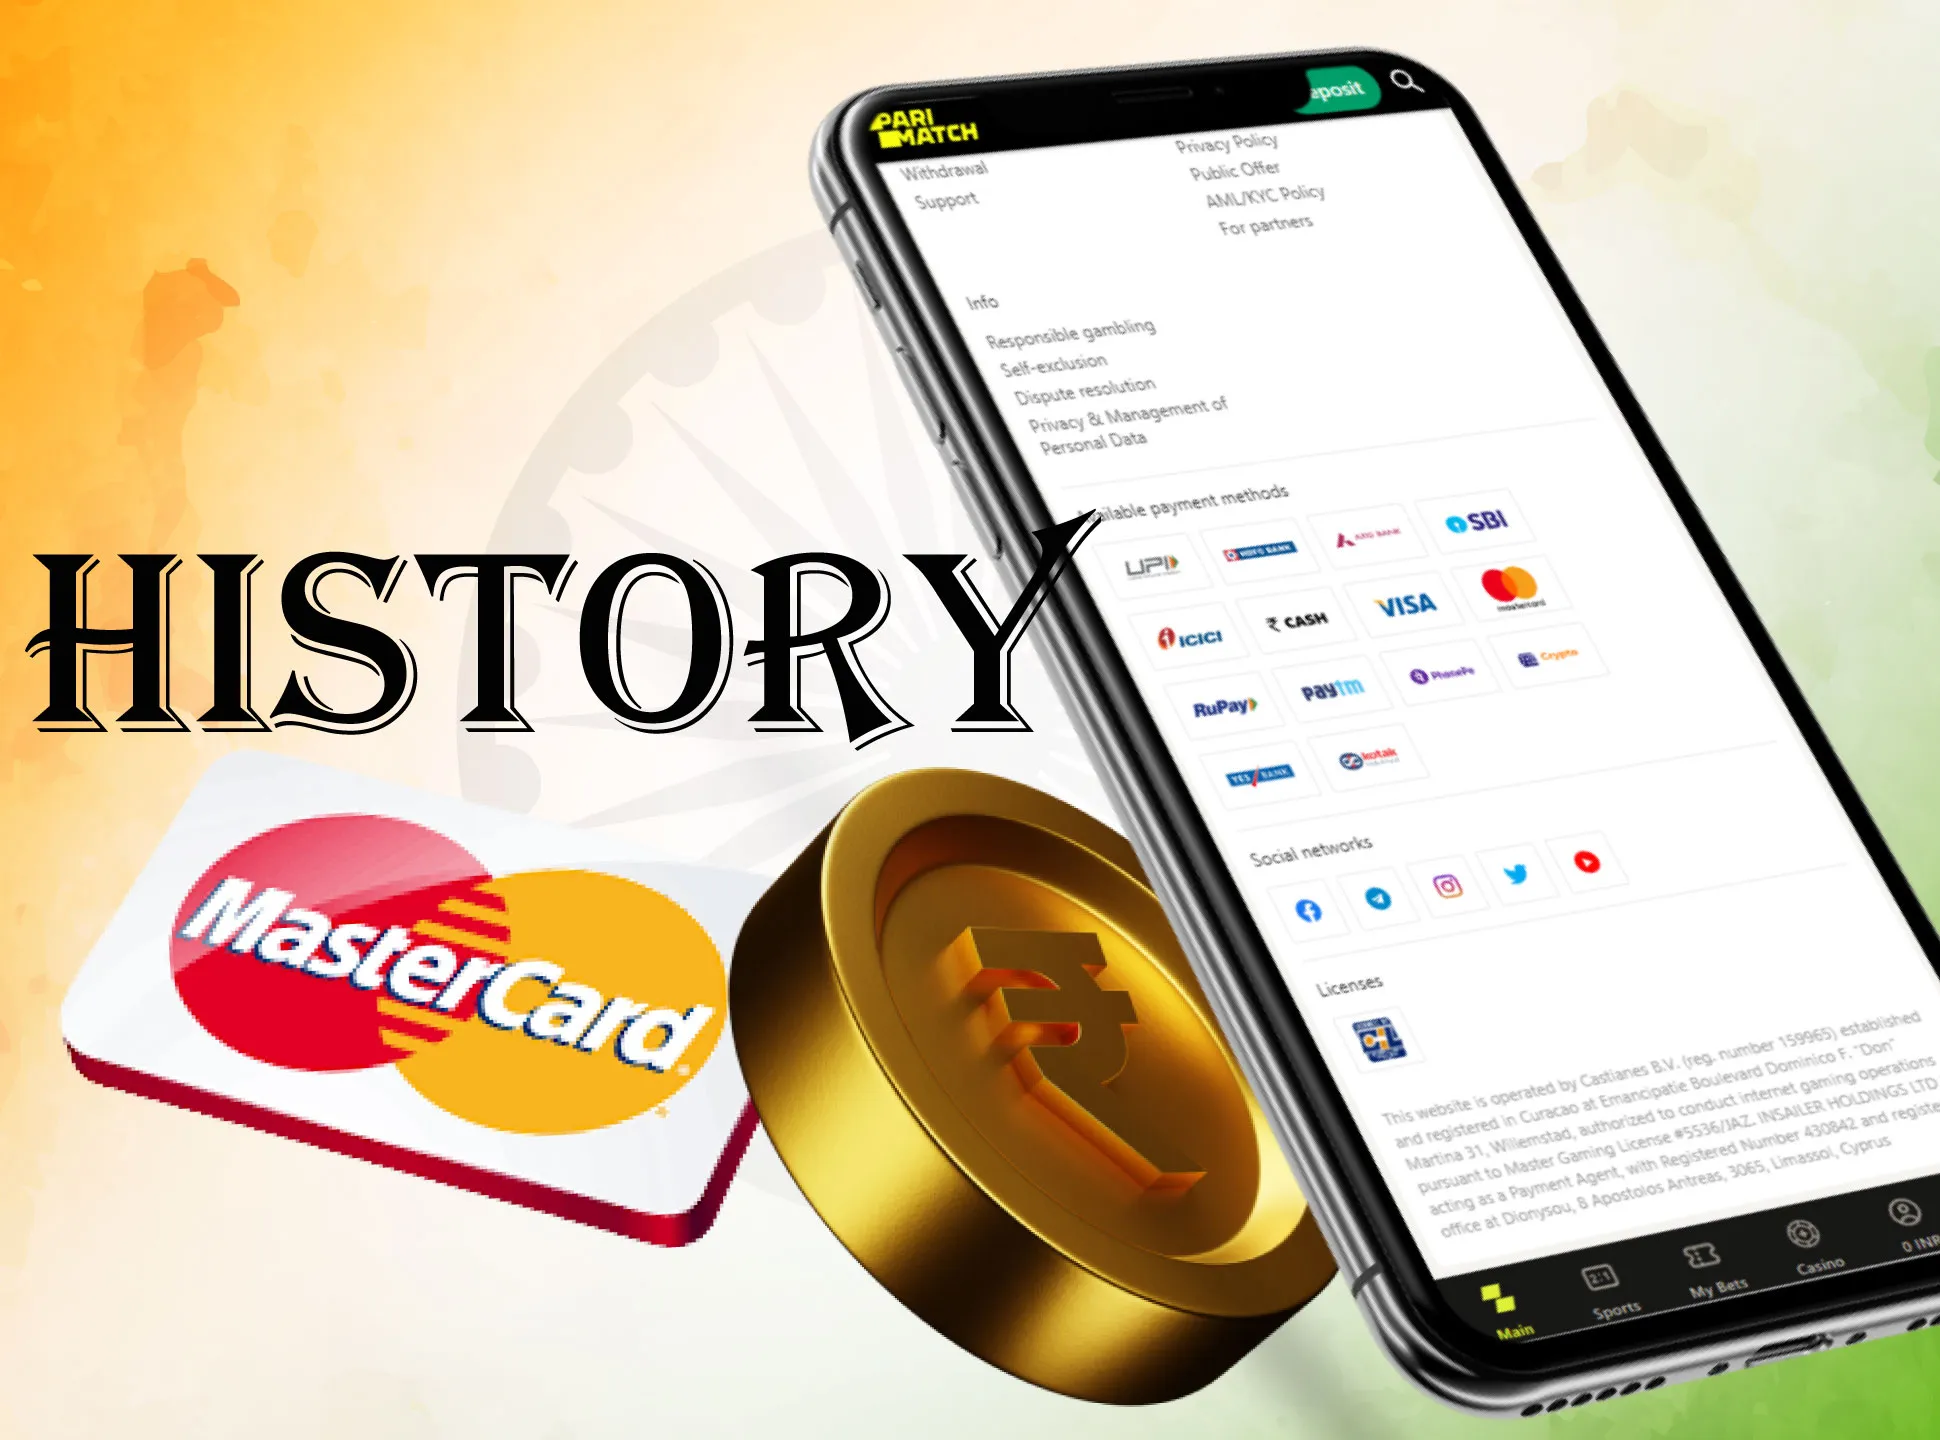 The Mastercard system was invented in 1967.